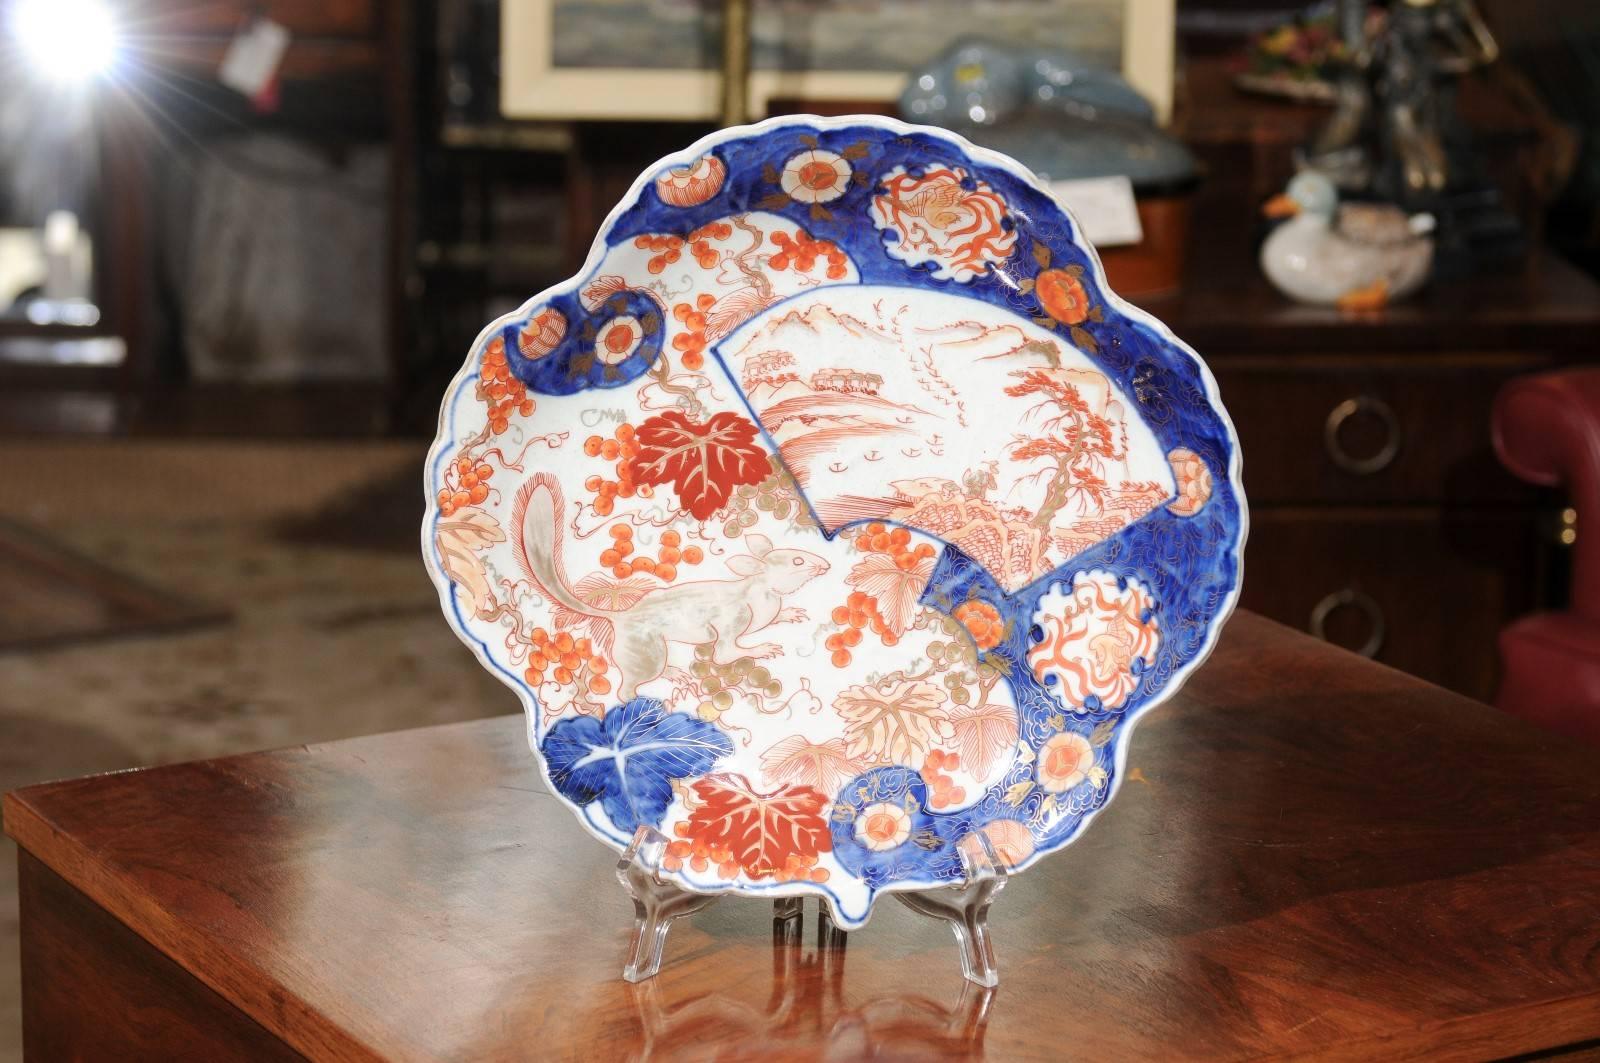 19th Century Japanese export Imari porcelain plate with an unusual scalloped and shell shape and a rare squirrel motif.  